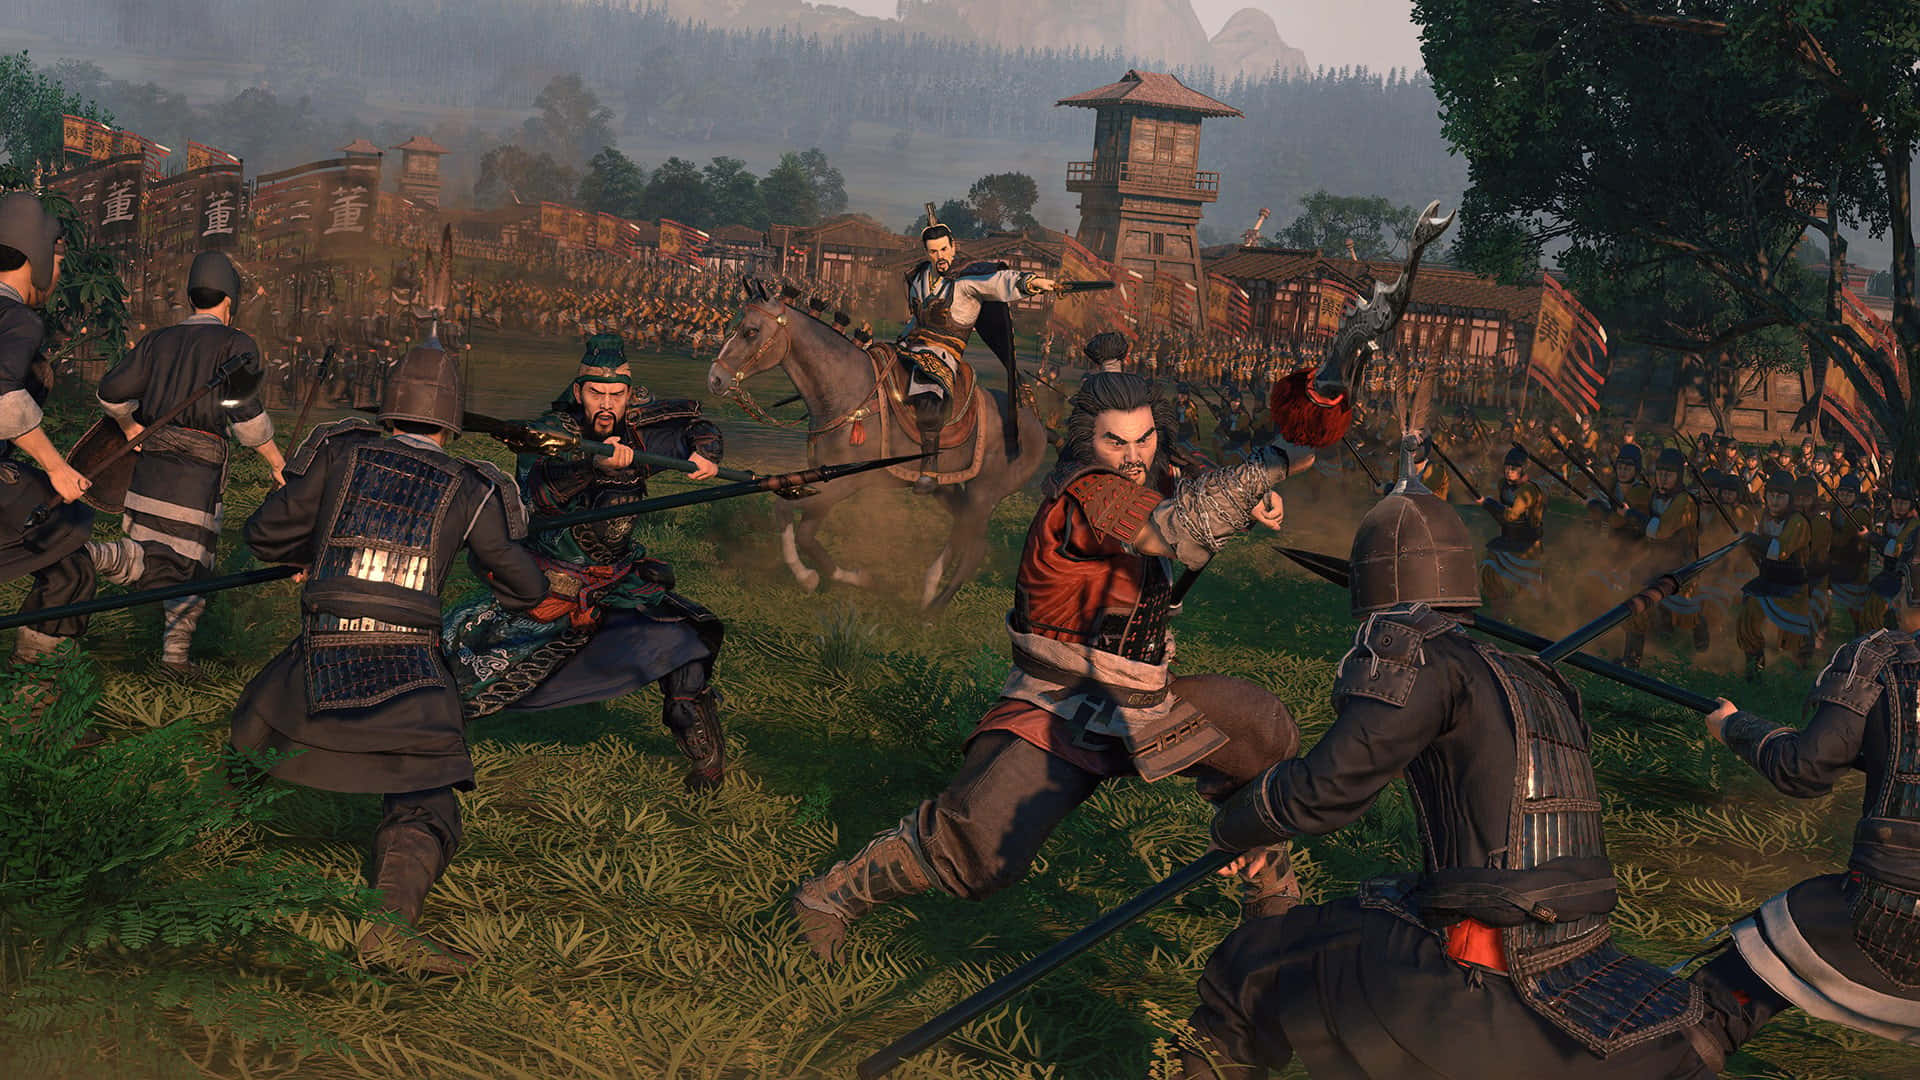 A Group Of Men In Armor Are Fighting In A Game